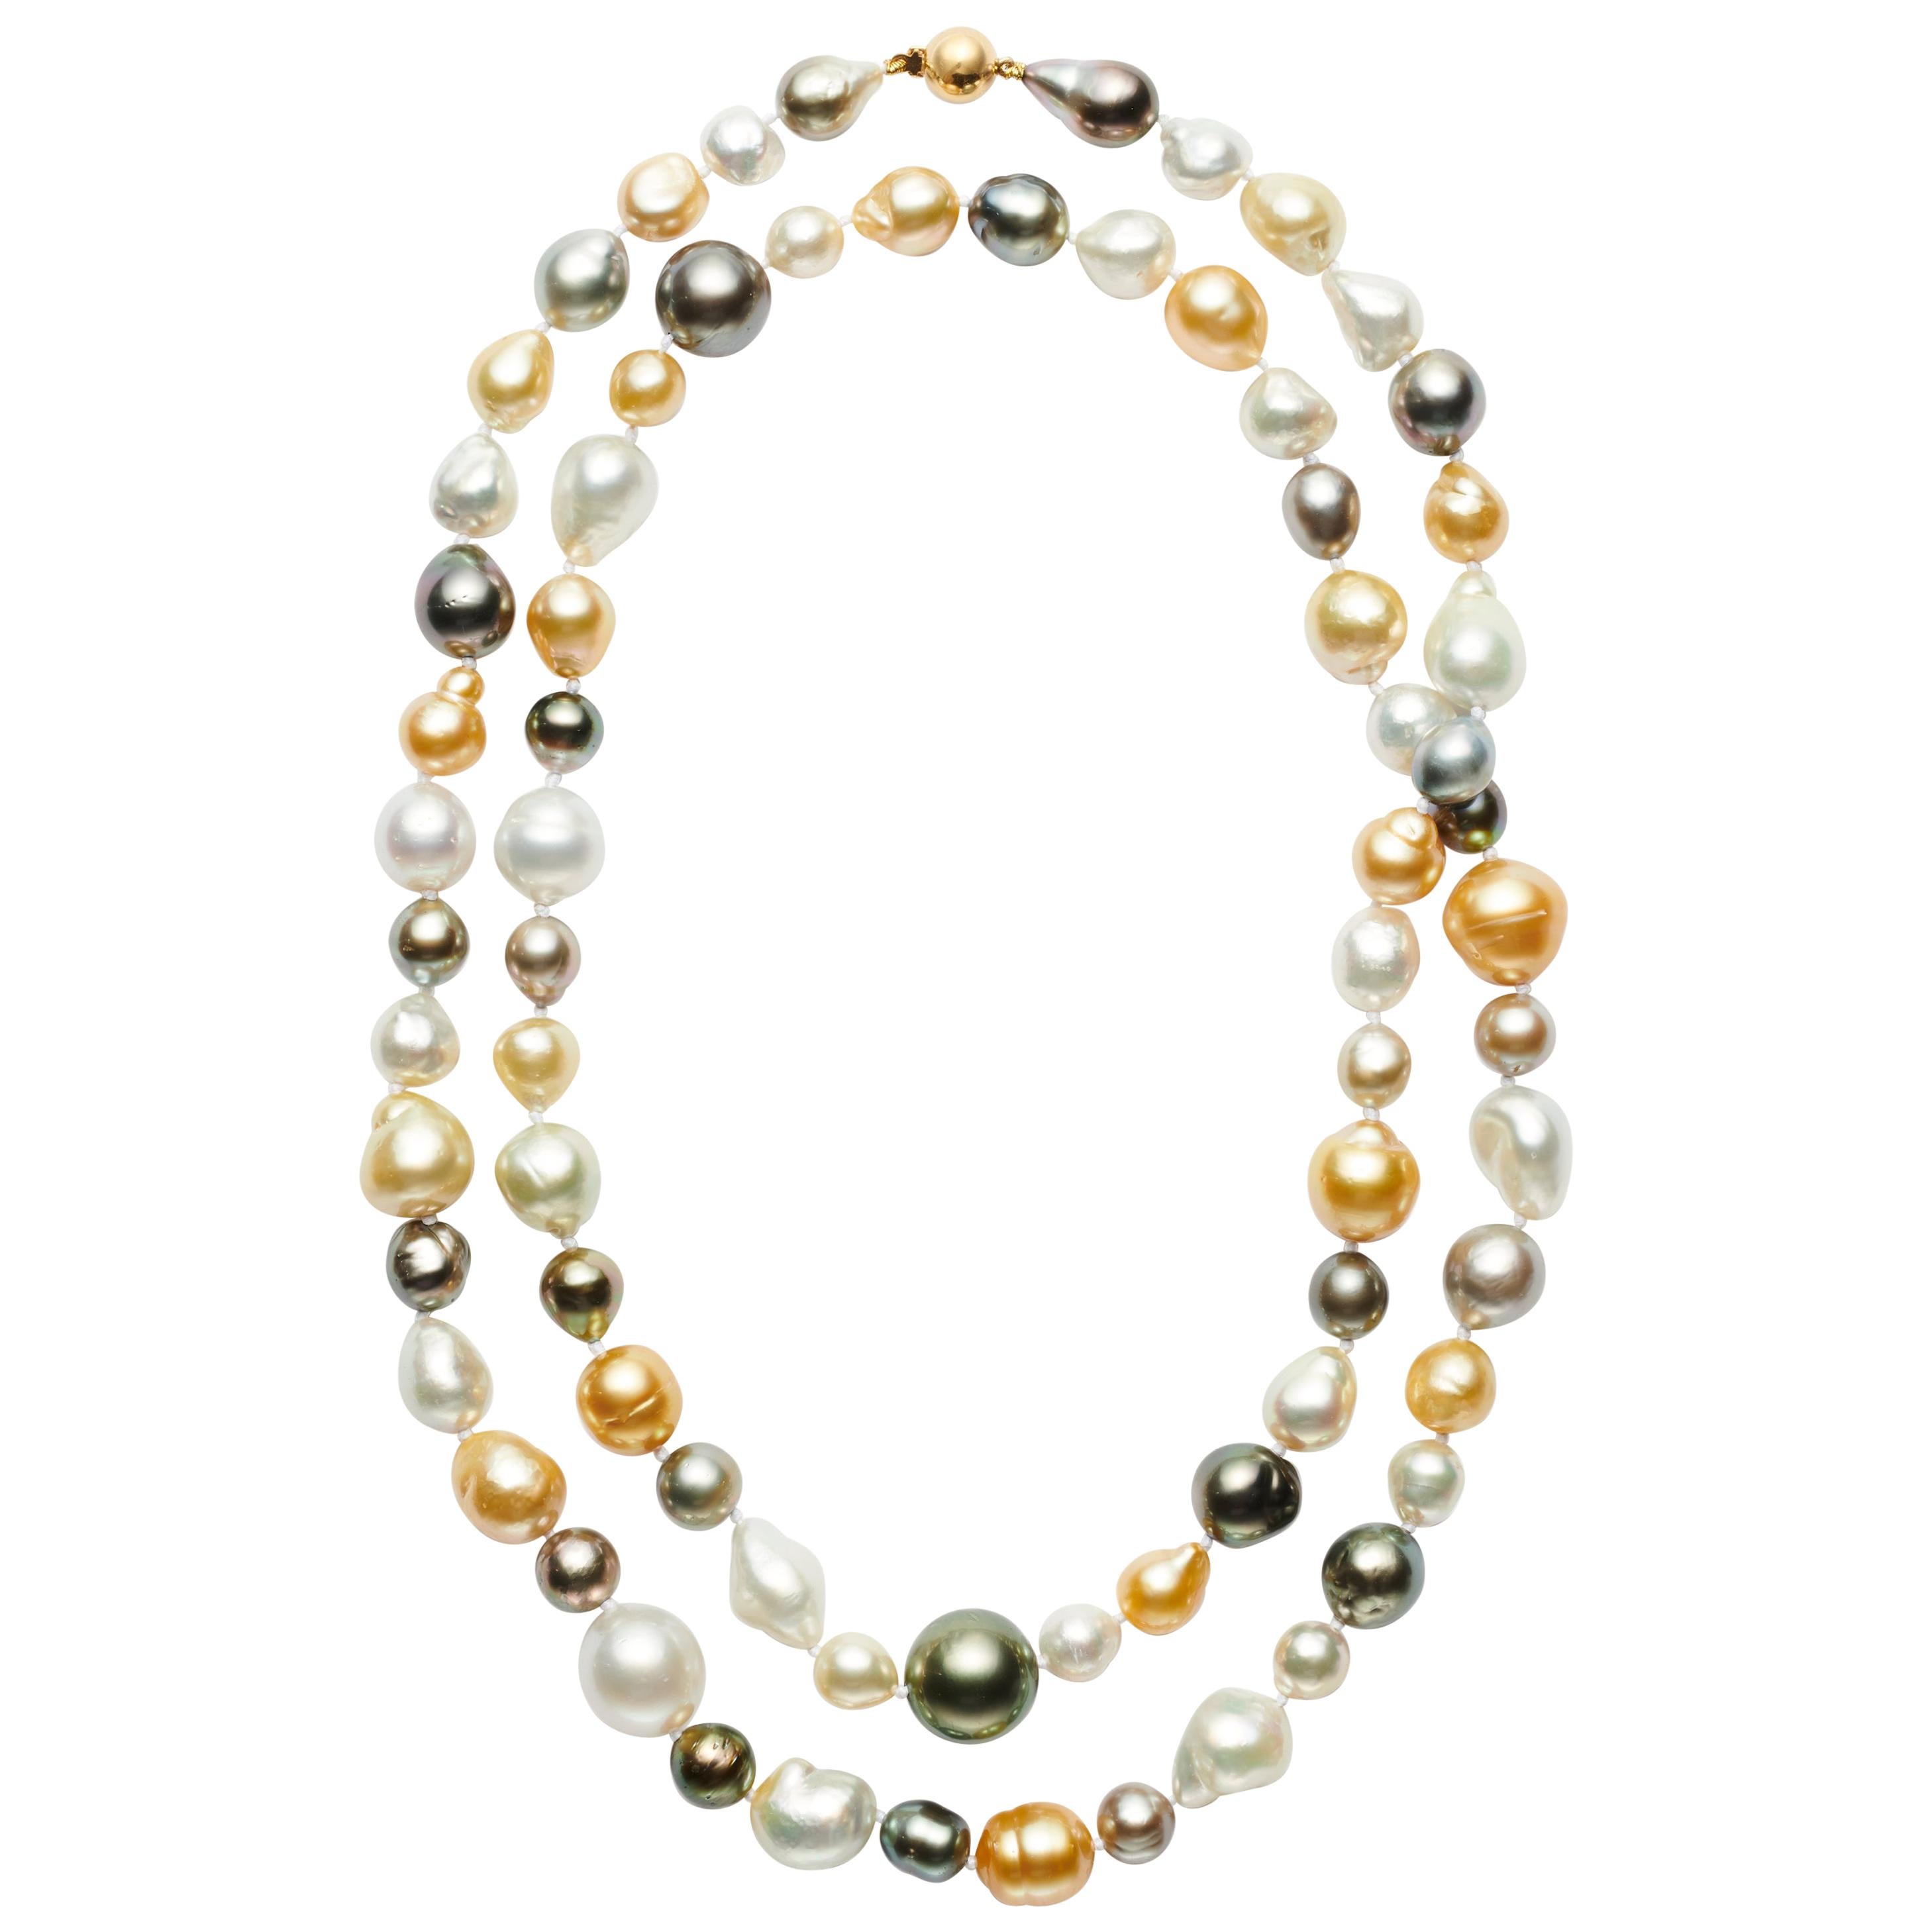 Natural Golden, Multicolored Tahitian, White Round and Baroque South Sea Pearls For Sale